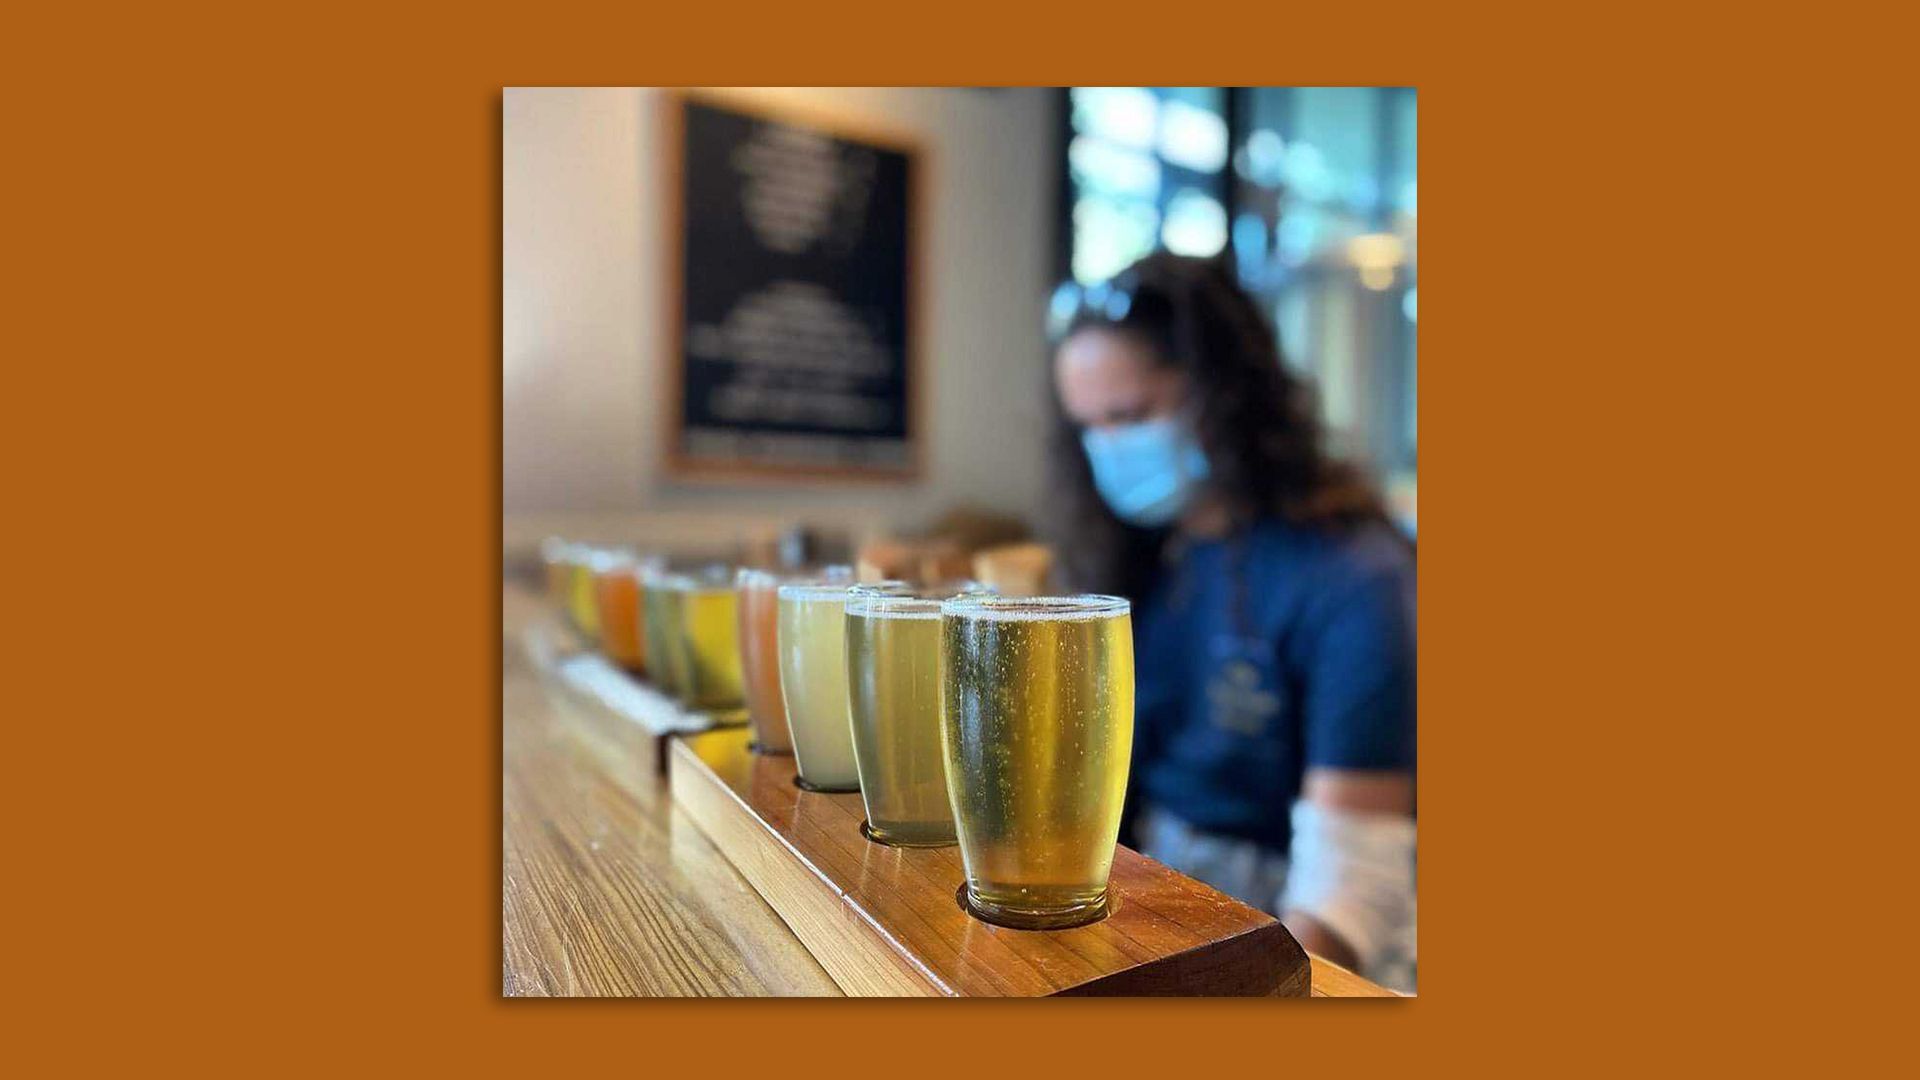 Flights of hard cider sit on a countertop.